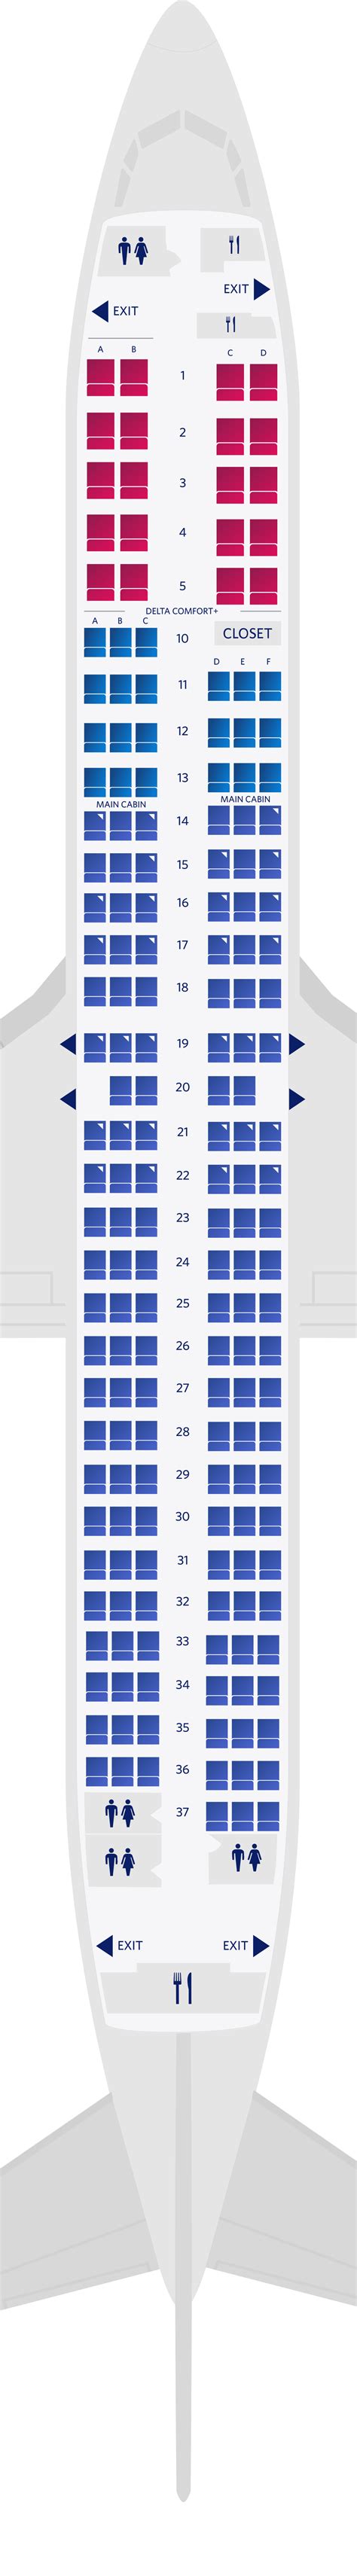 United 737-900 seat map. Standard seat. 30 -31. 17. 14-39. 114. Find the best seat wiht our United Boeing 737-900 (739) v3 seating chart. Use this seat map to get the most comfortable seats, legroom and recline before booking. 